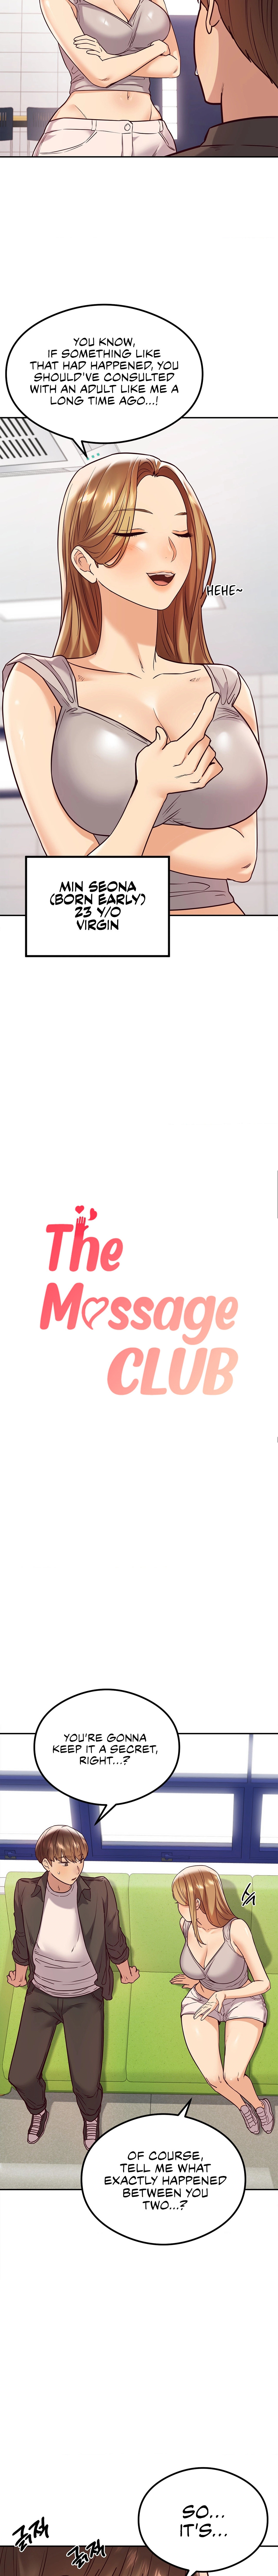 The Massage Club - Chapter 11 Page 4